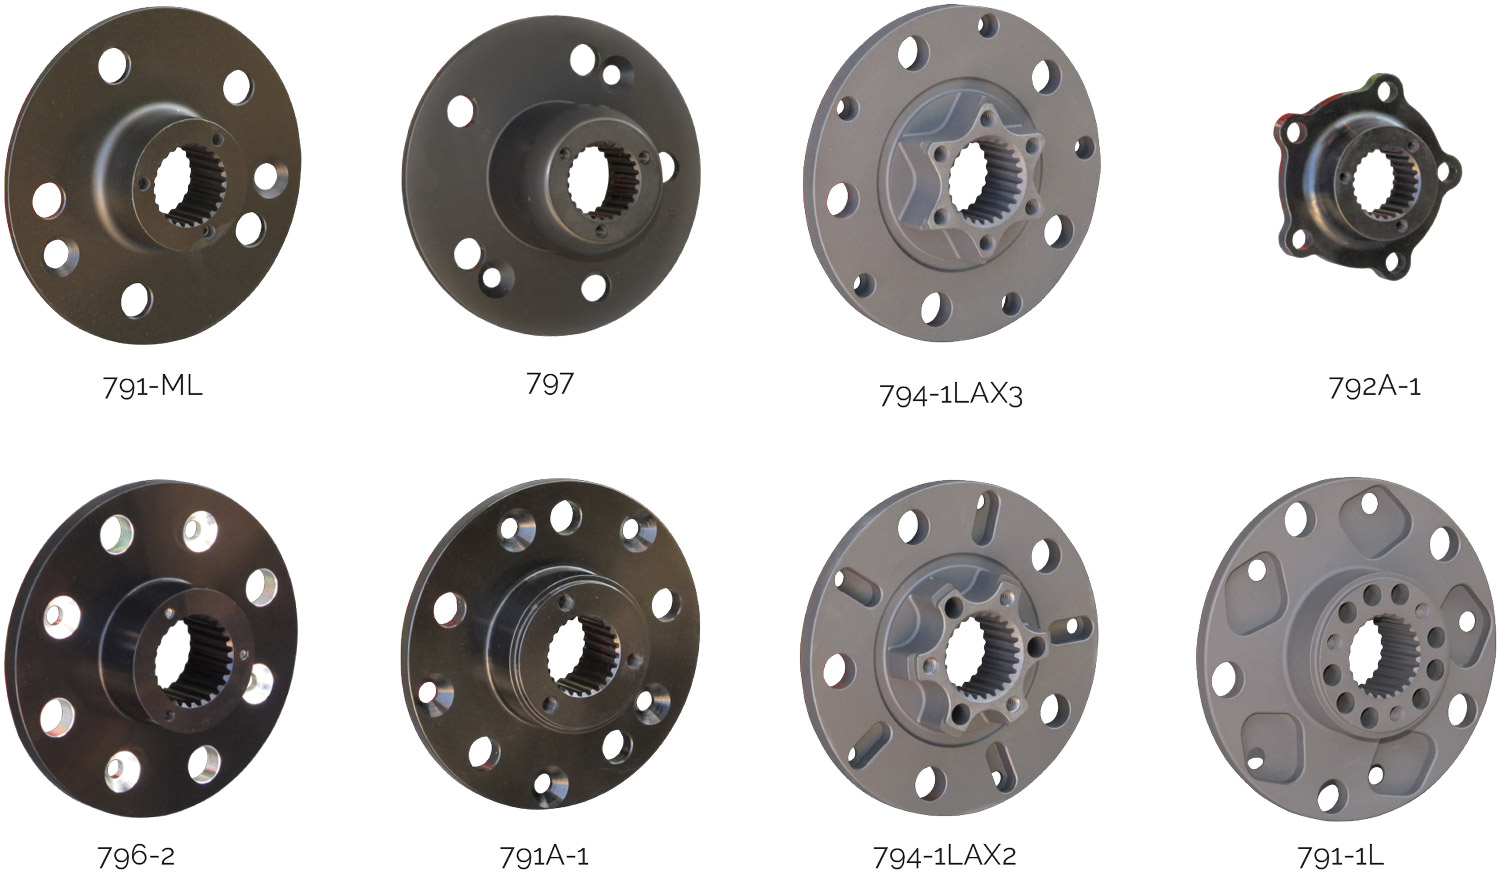 Steel and Aluminum Drive Plates